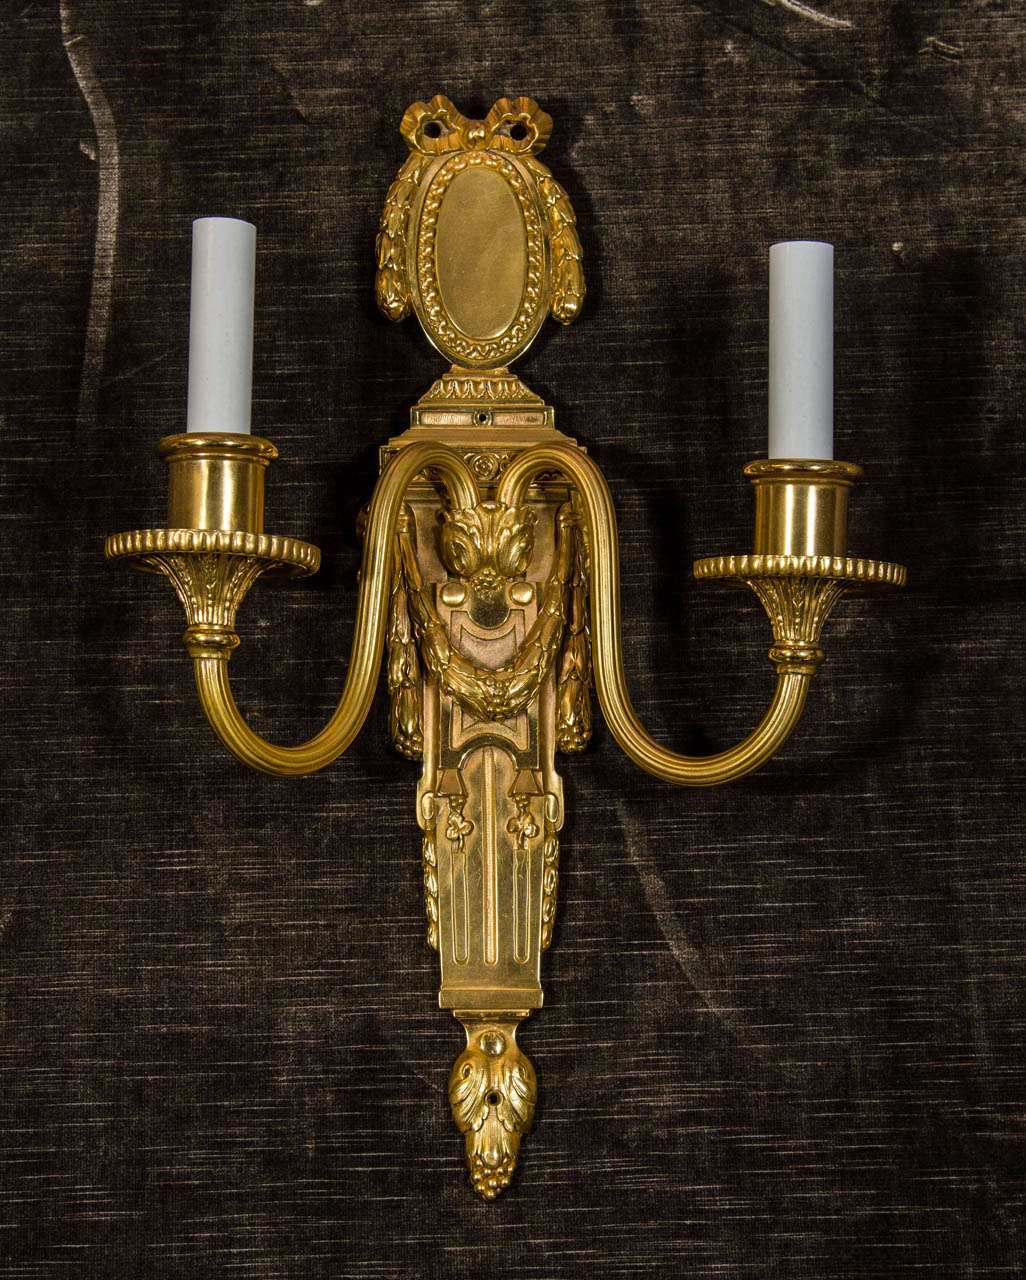 A pair of  antique American Louis XVI style gilt bronze double-light wall sconces of fine quality embellished with ribbons and wreaths by E. F. Caldwell.